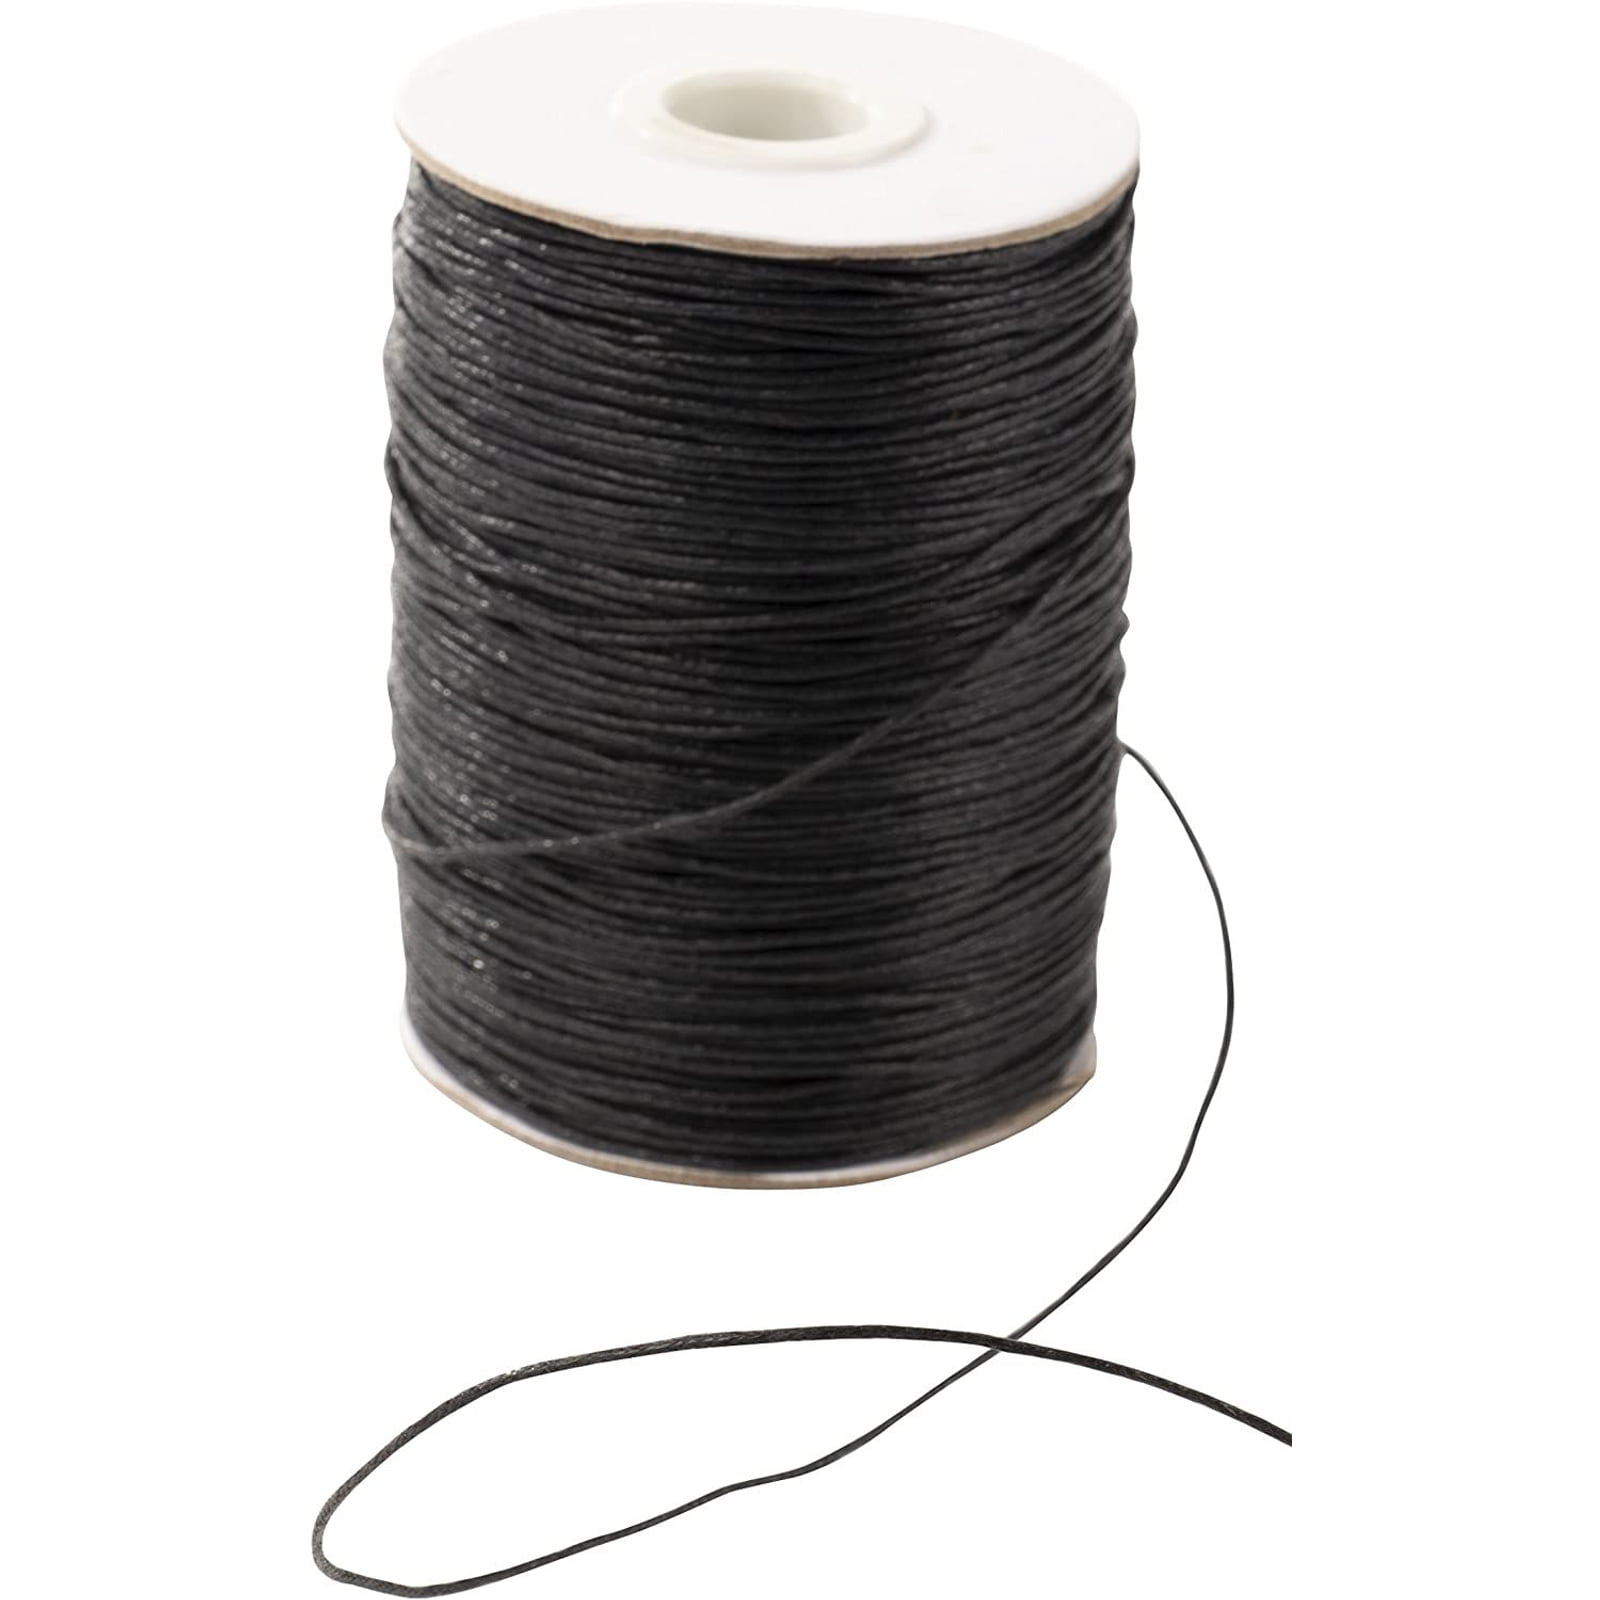 Buy 10 Yds. Waxed Cotton Cord for Jewelry Making, Sewing Leather Goods,  Waxed Cord in a Choice of 6 Earthy Shades, TEN YARDS Online in India 